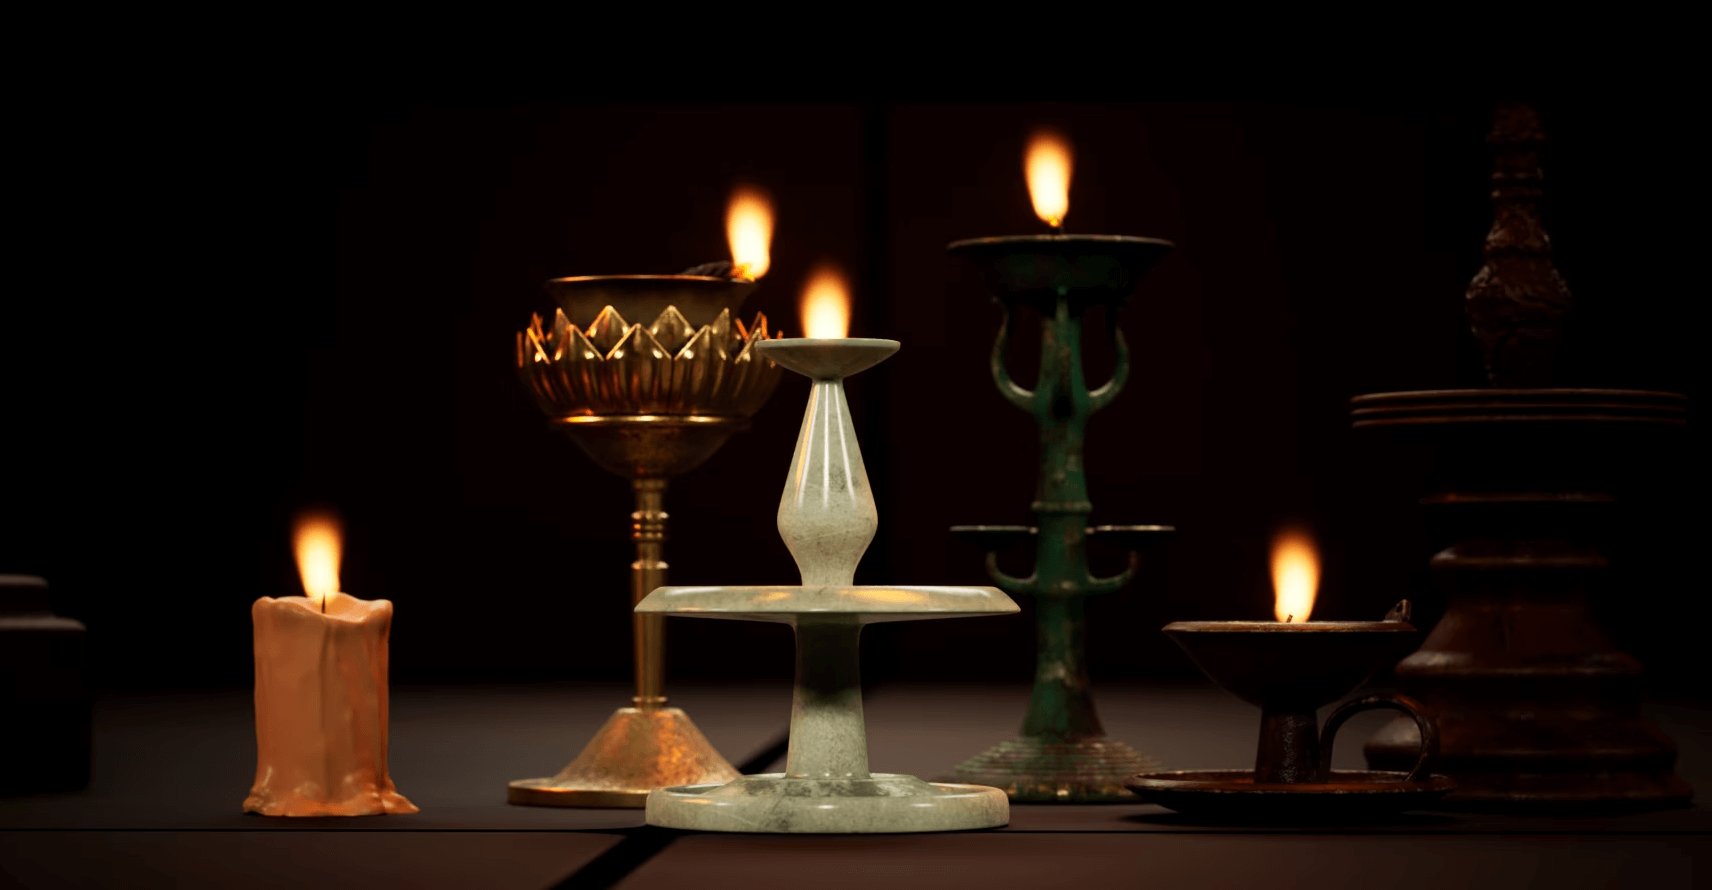 【UE5】中国古代灯具 – Ancient Chinese Lamps Props